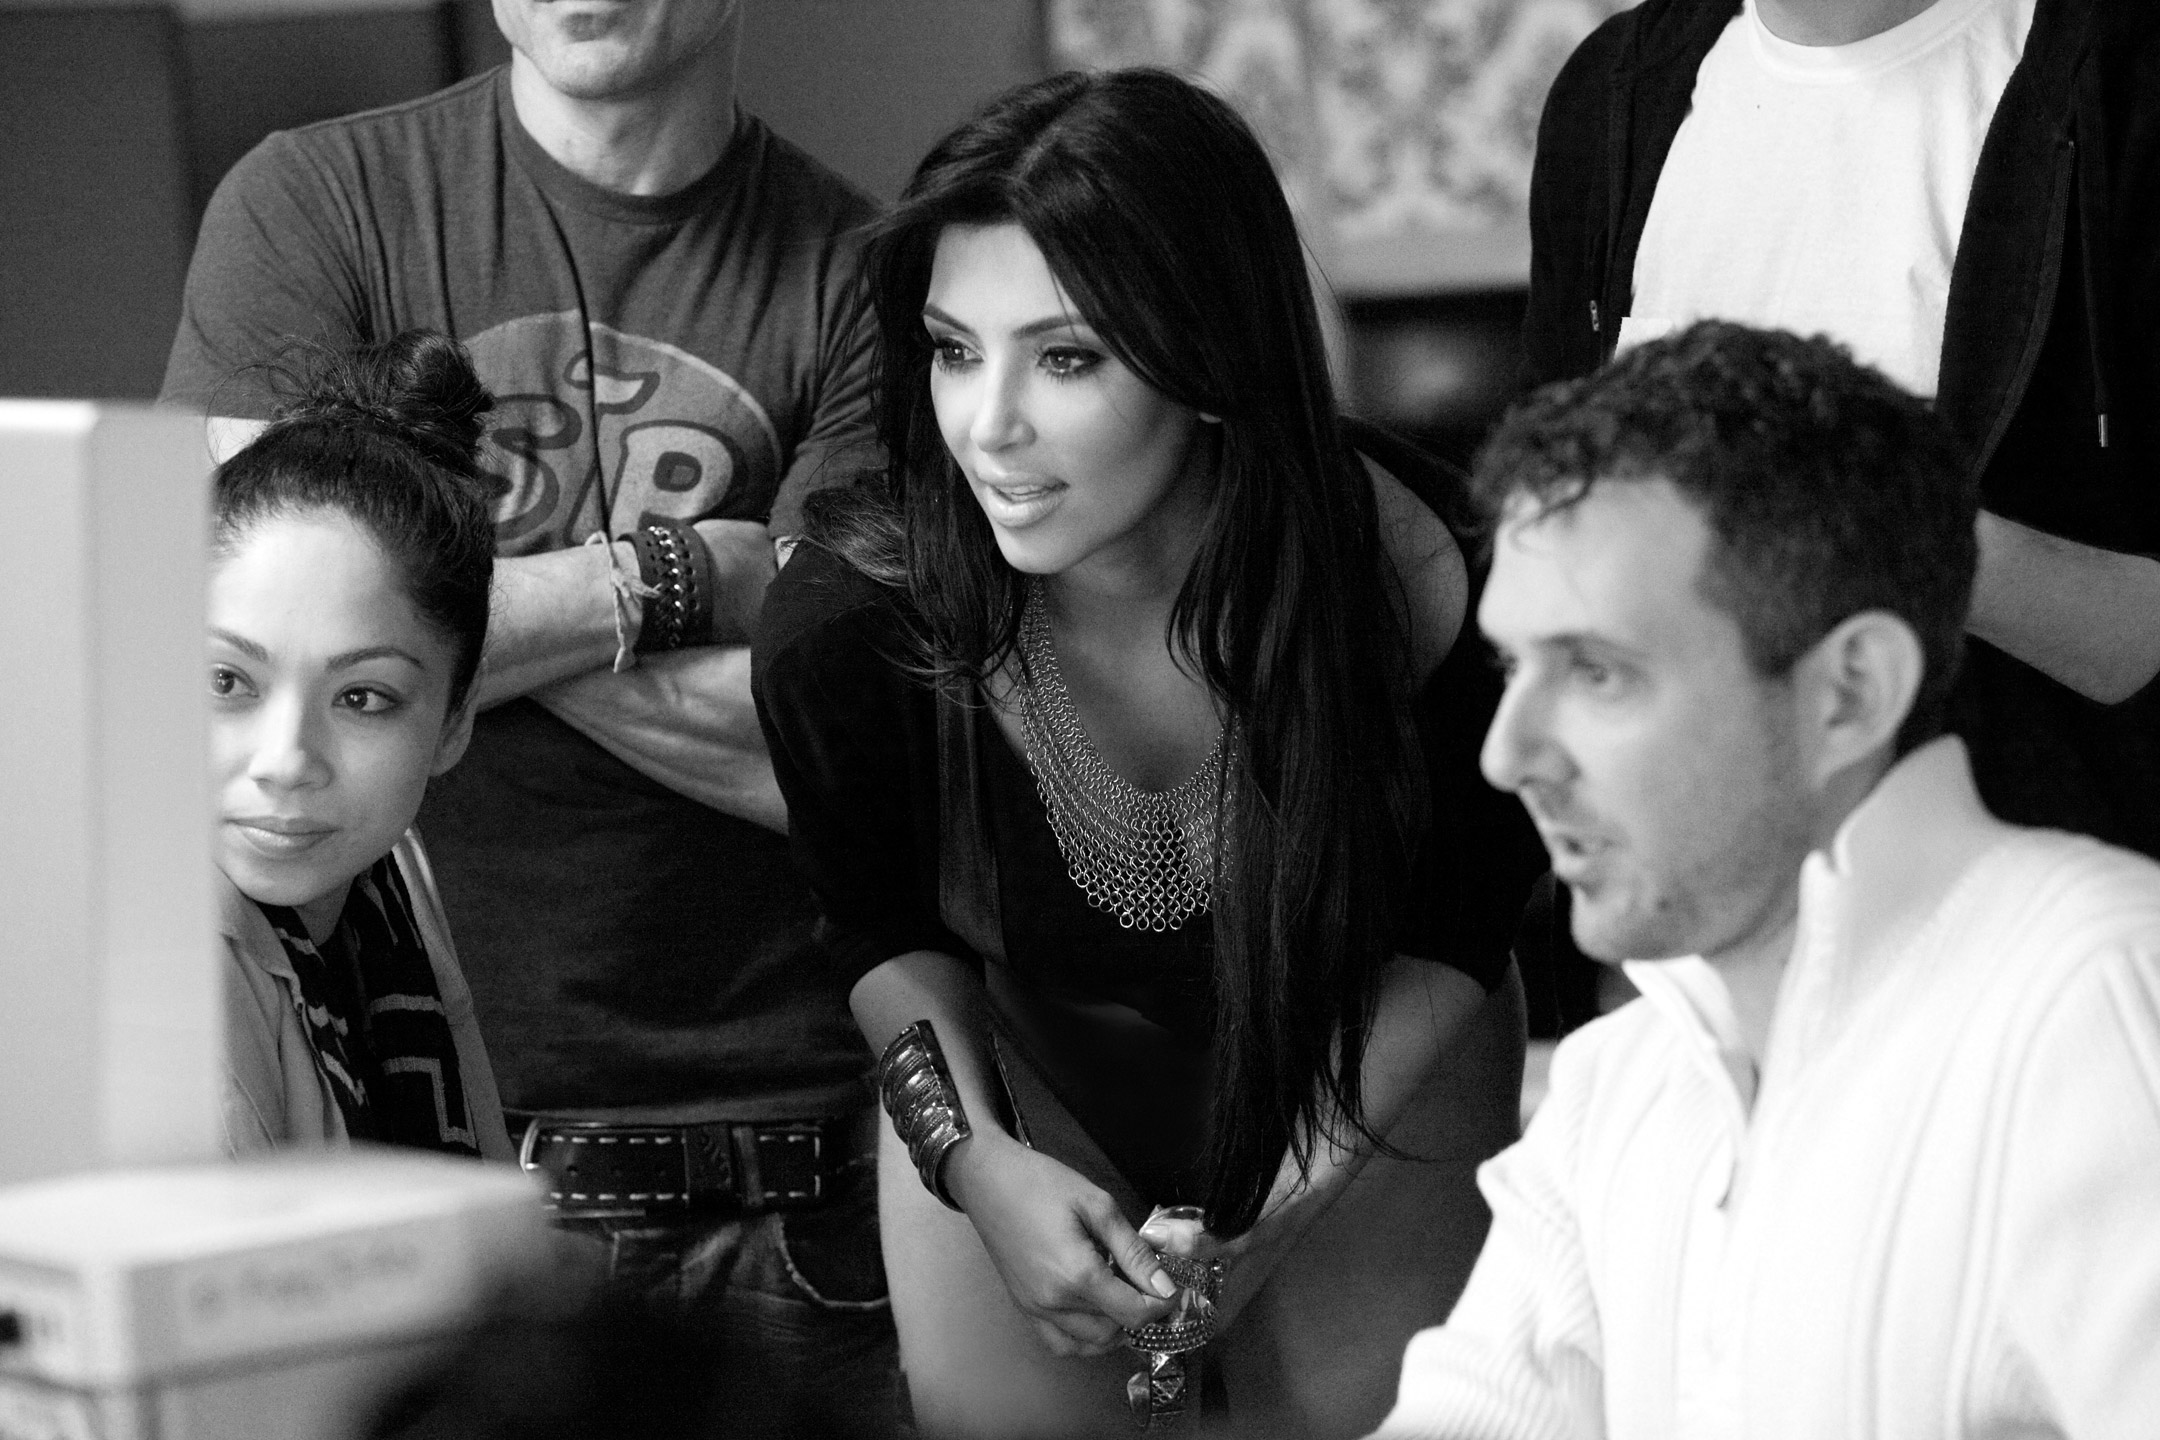 At a cover shoot with Kim Kardashian and stylist Monica Rose.